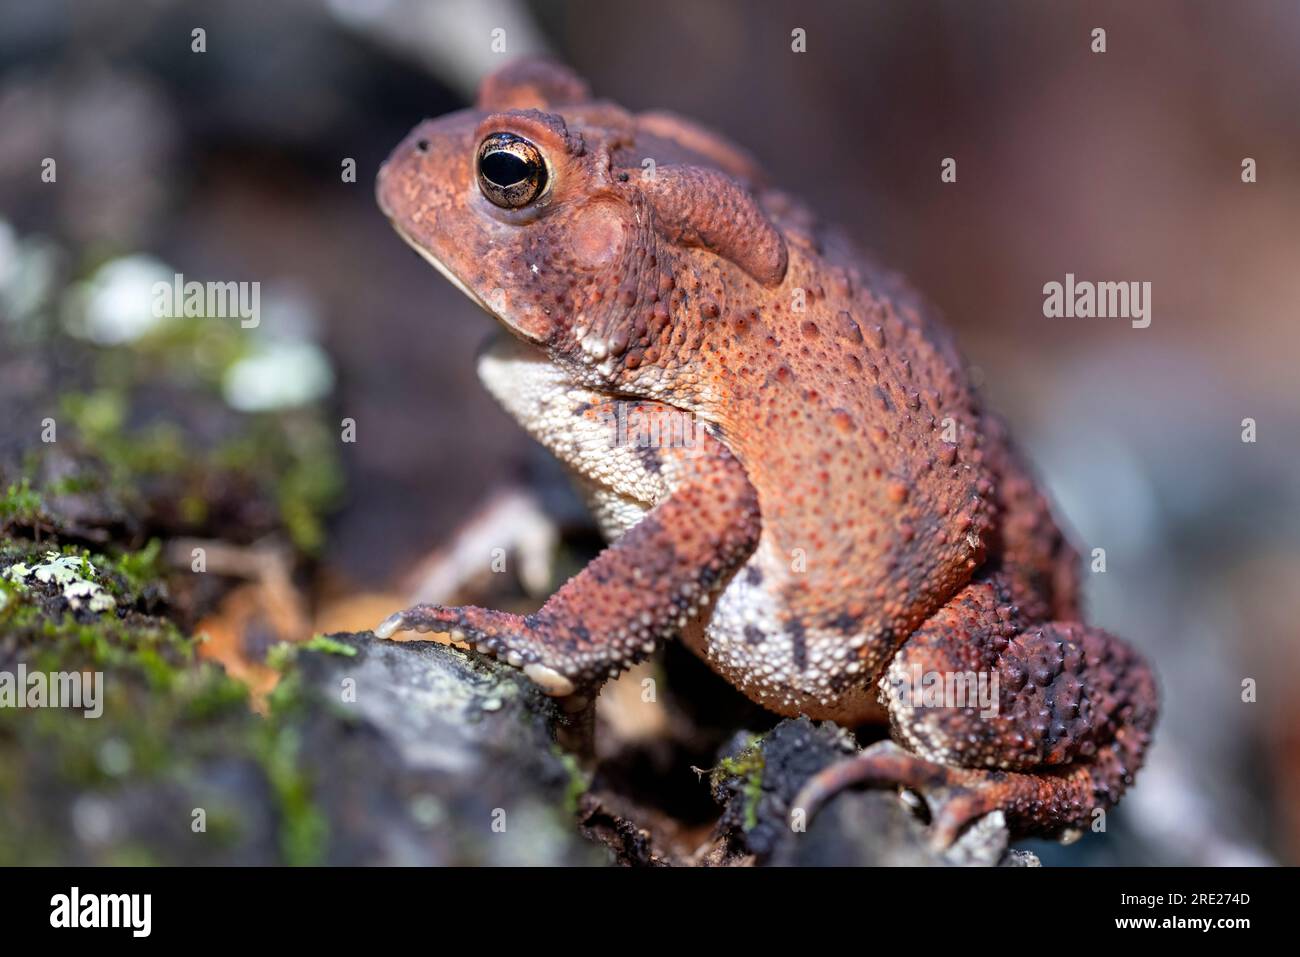 Close-up  of an American Toad (Anaxyrus americanus) - Dupont Recreational State Forest, near Brevard, North Carolina, USA Stock Photo